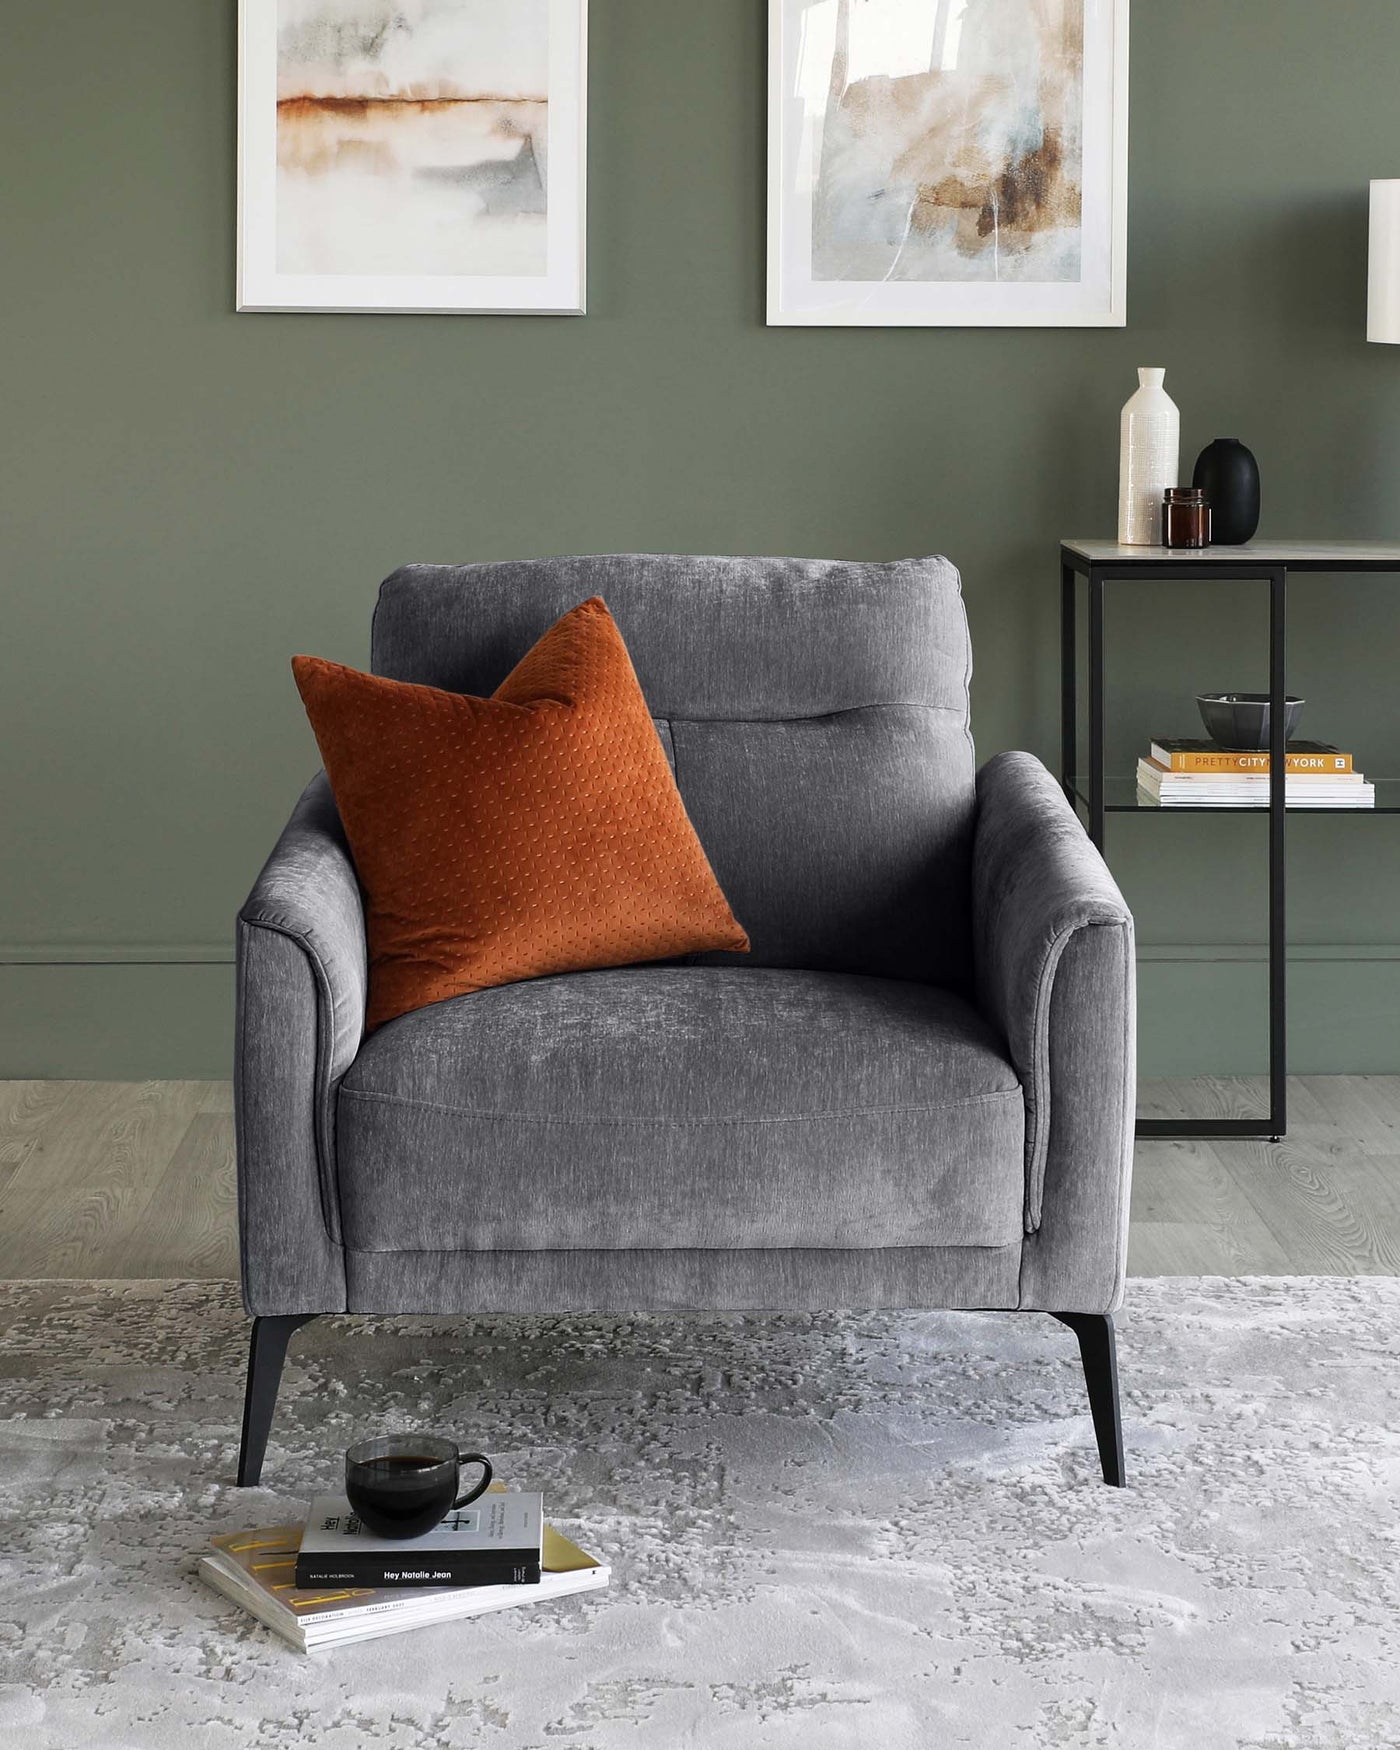 A modern grey fabric armchair with black metal legs, featuring a curved backrest and a plush seat, complemented by a single orange textured throw pillow. In the setting, there is also a minimalist matte black metal side table with a rectangular surface and a lower shelf holding books and decorative items.